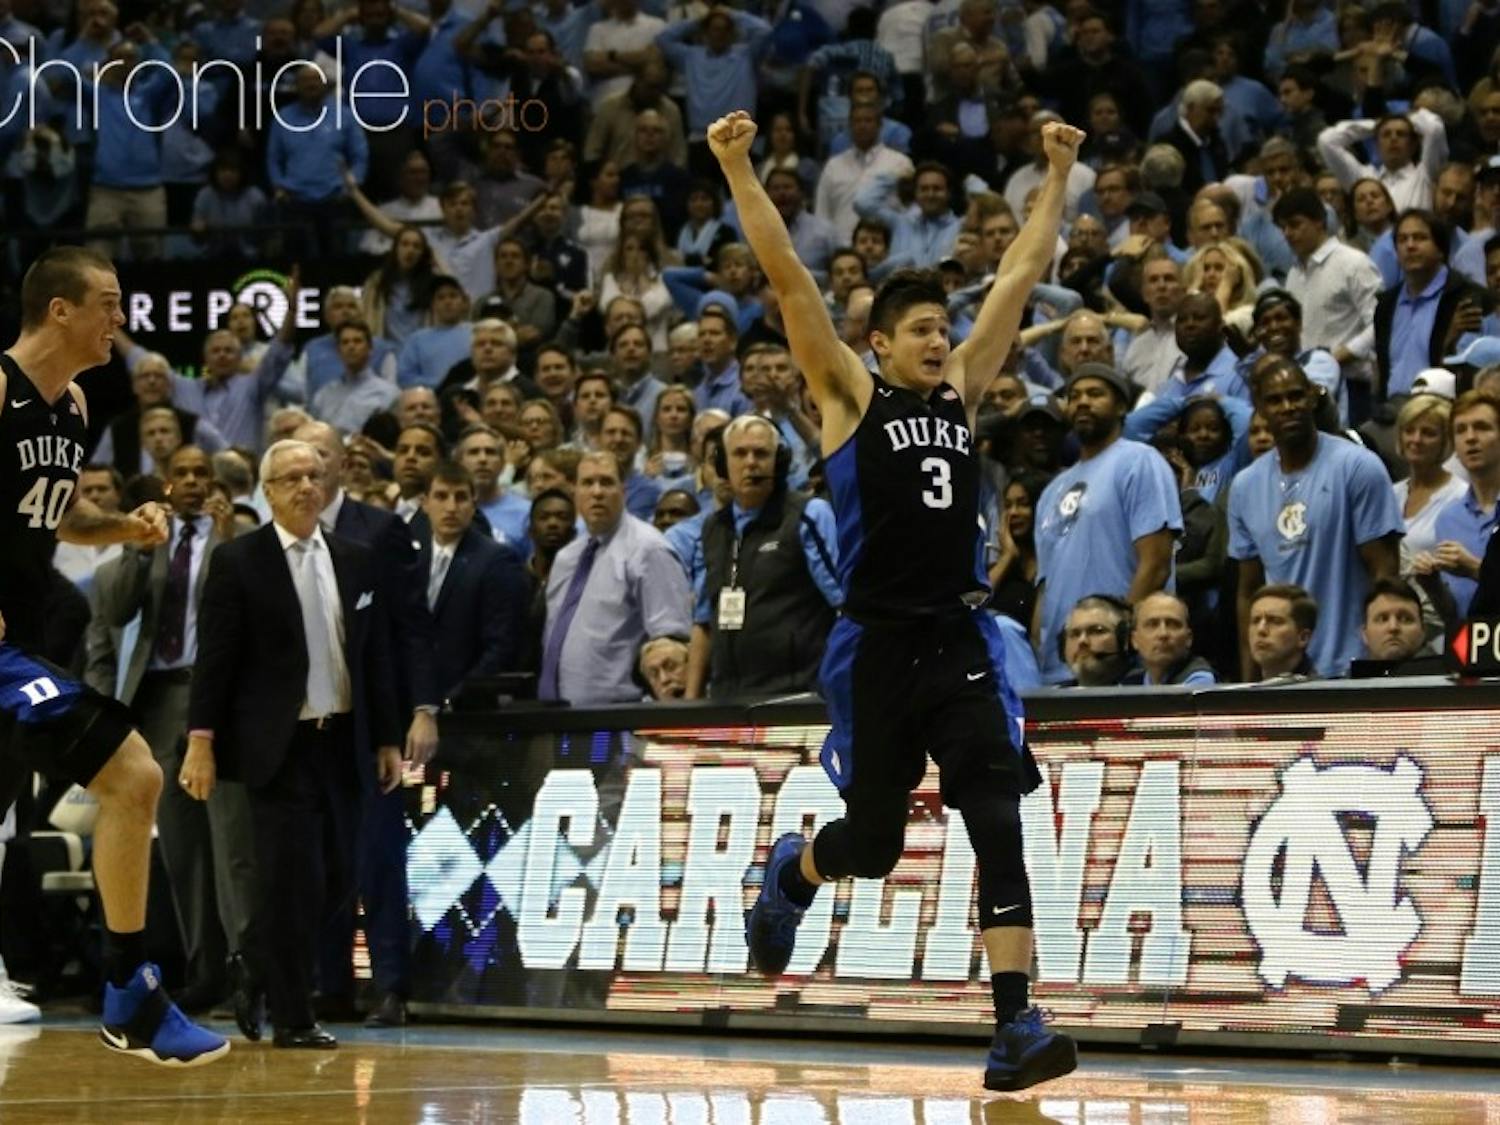 The Blue Devils' win at North Carolina in February was one of the highlights of the year in Duke Athletics.&nbsp;